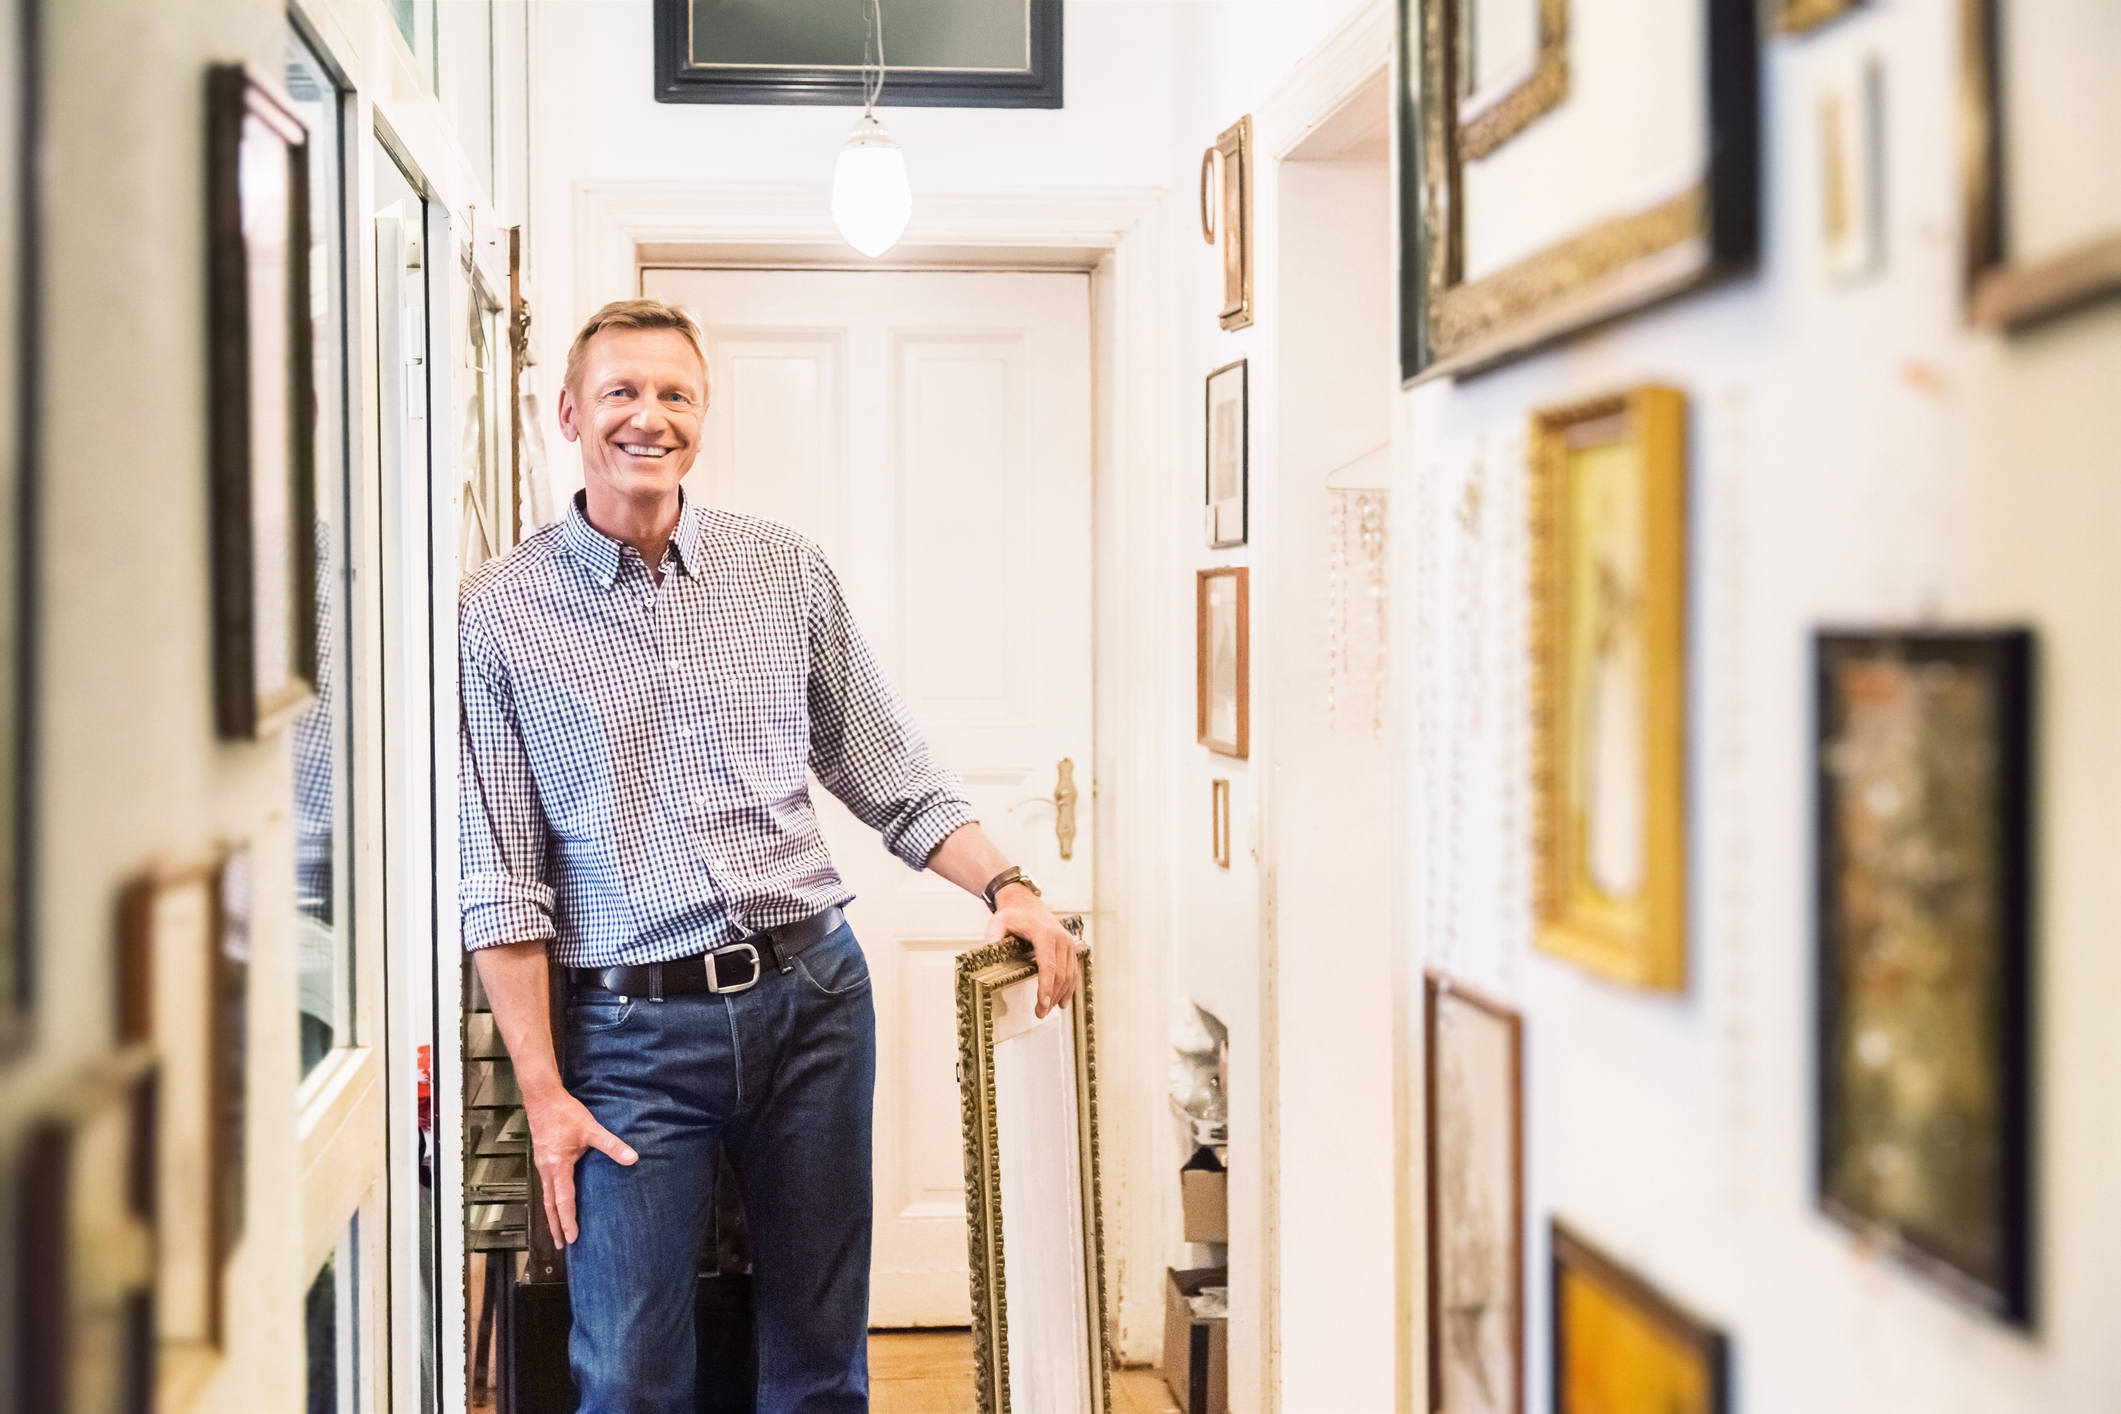 A man smiles standing in his hallway lined with framed photos.